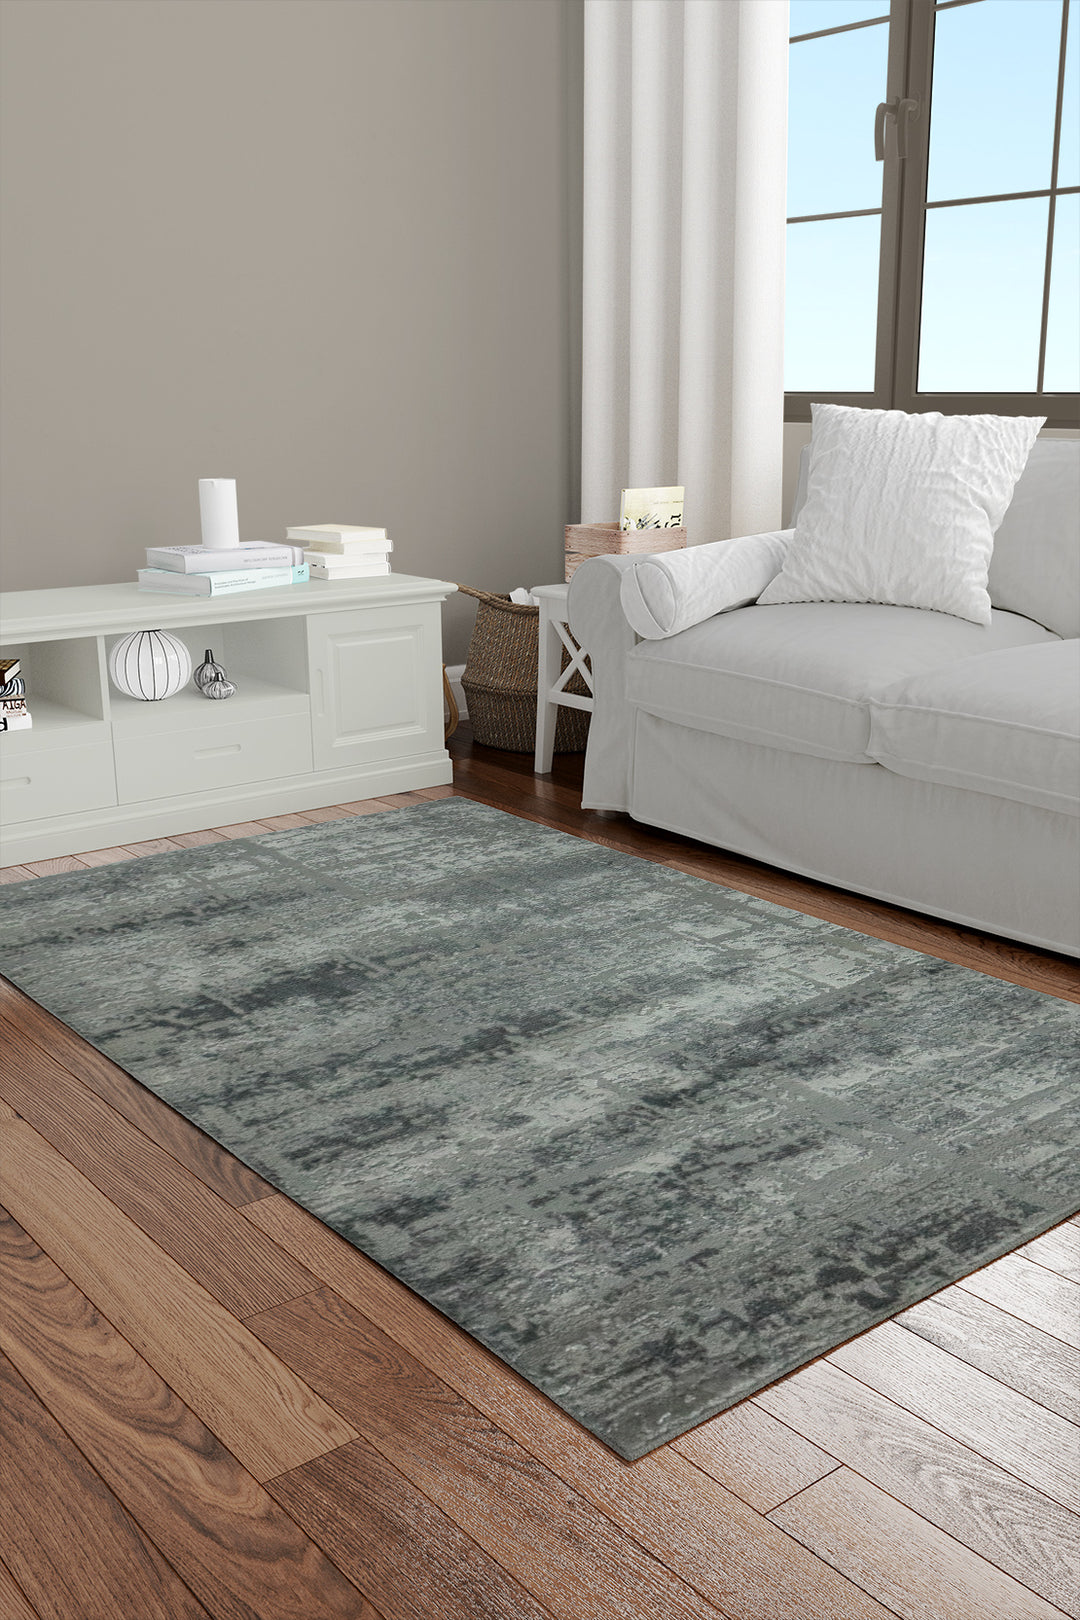 Turkish Modern Festival WD Rug - 2.6 x 3.8 FT - Gray - Sleek and Minimalist for Chic Interiors